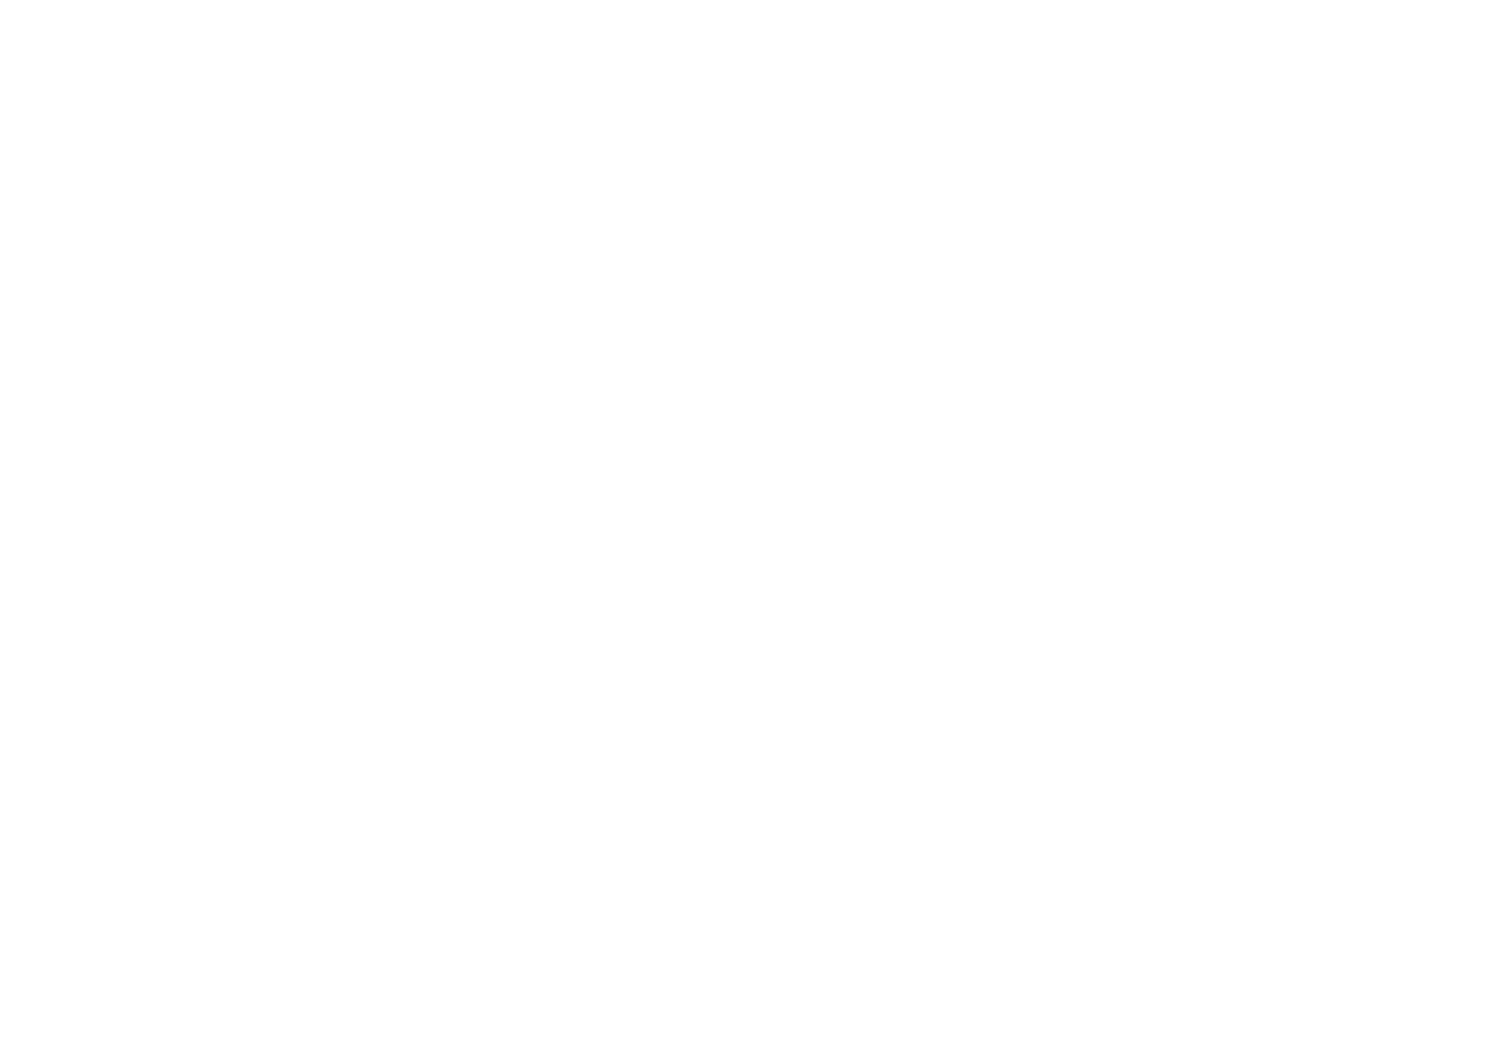 WAGS REDEFINED